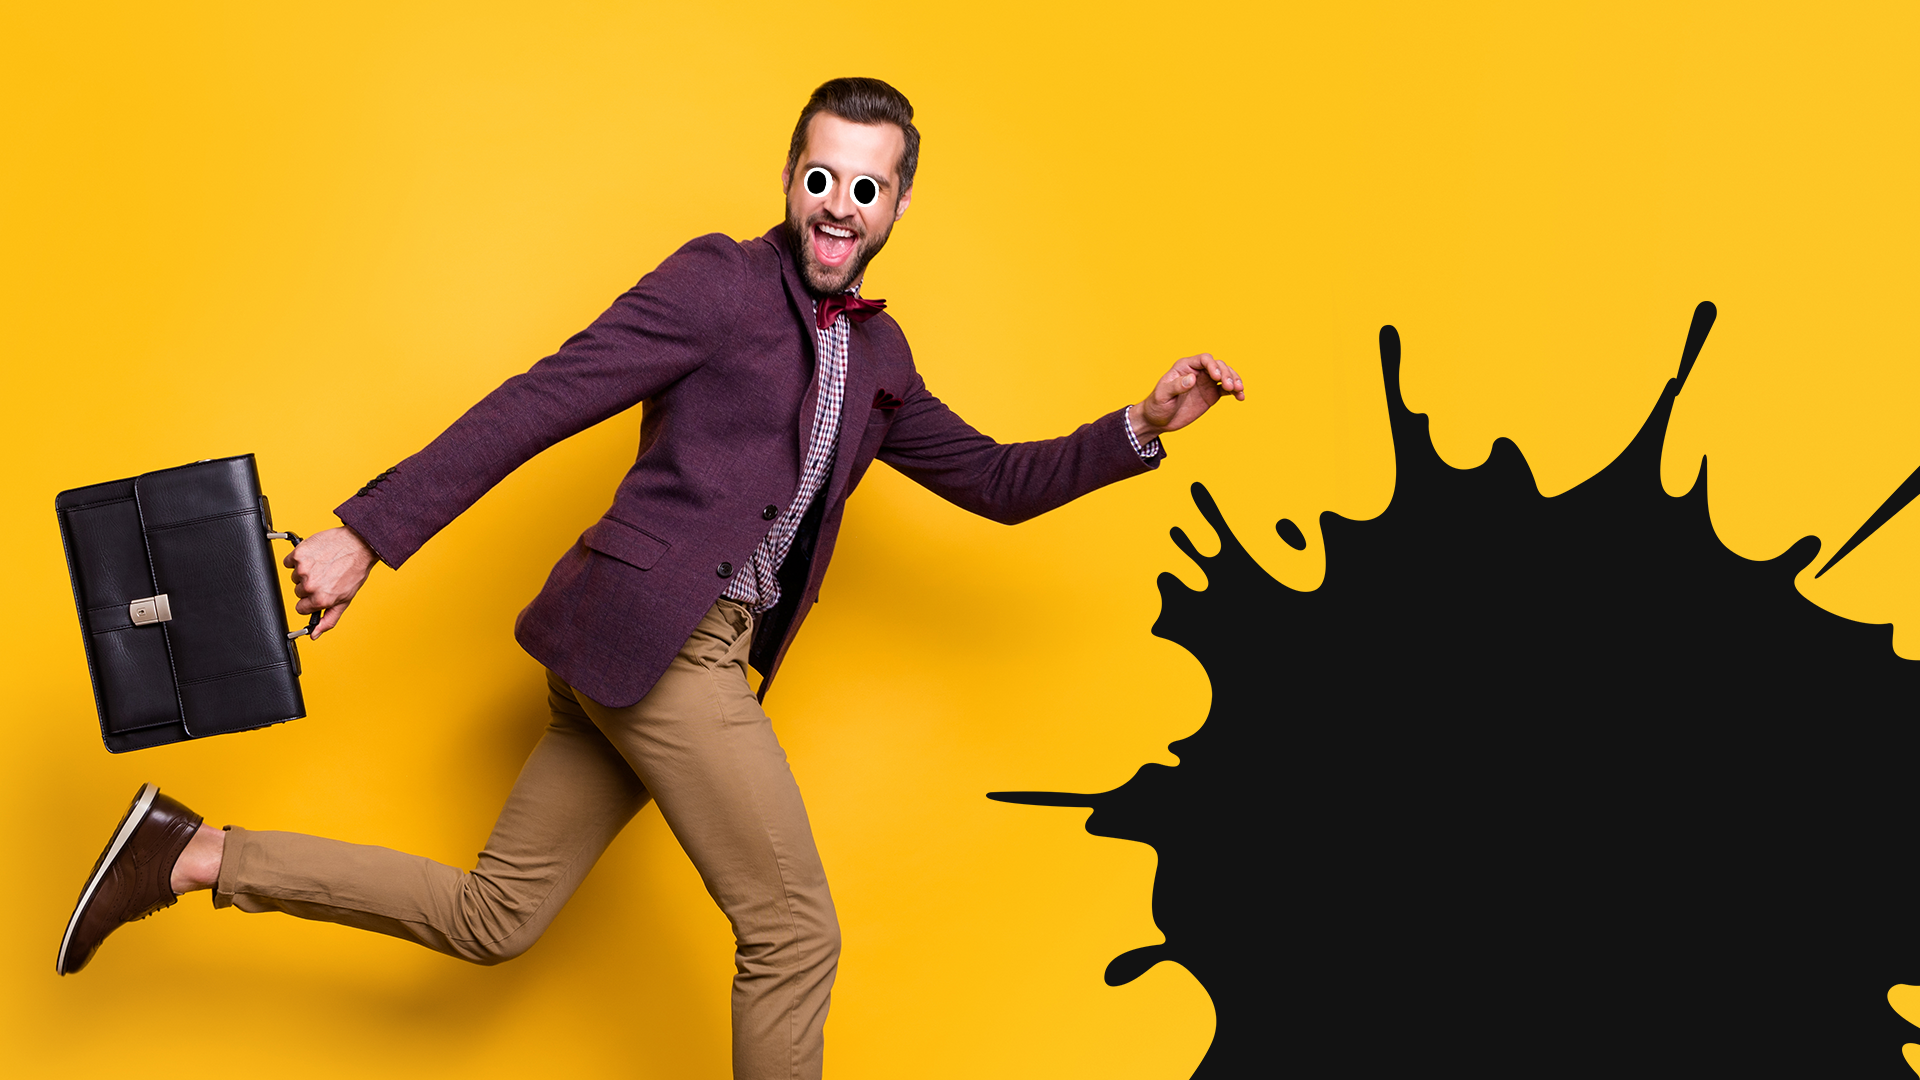 Man with briefcase on yellow background with splat